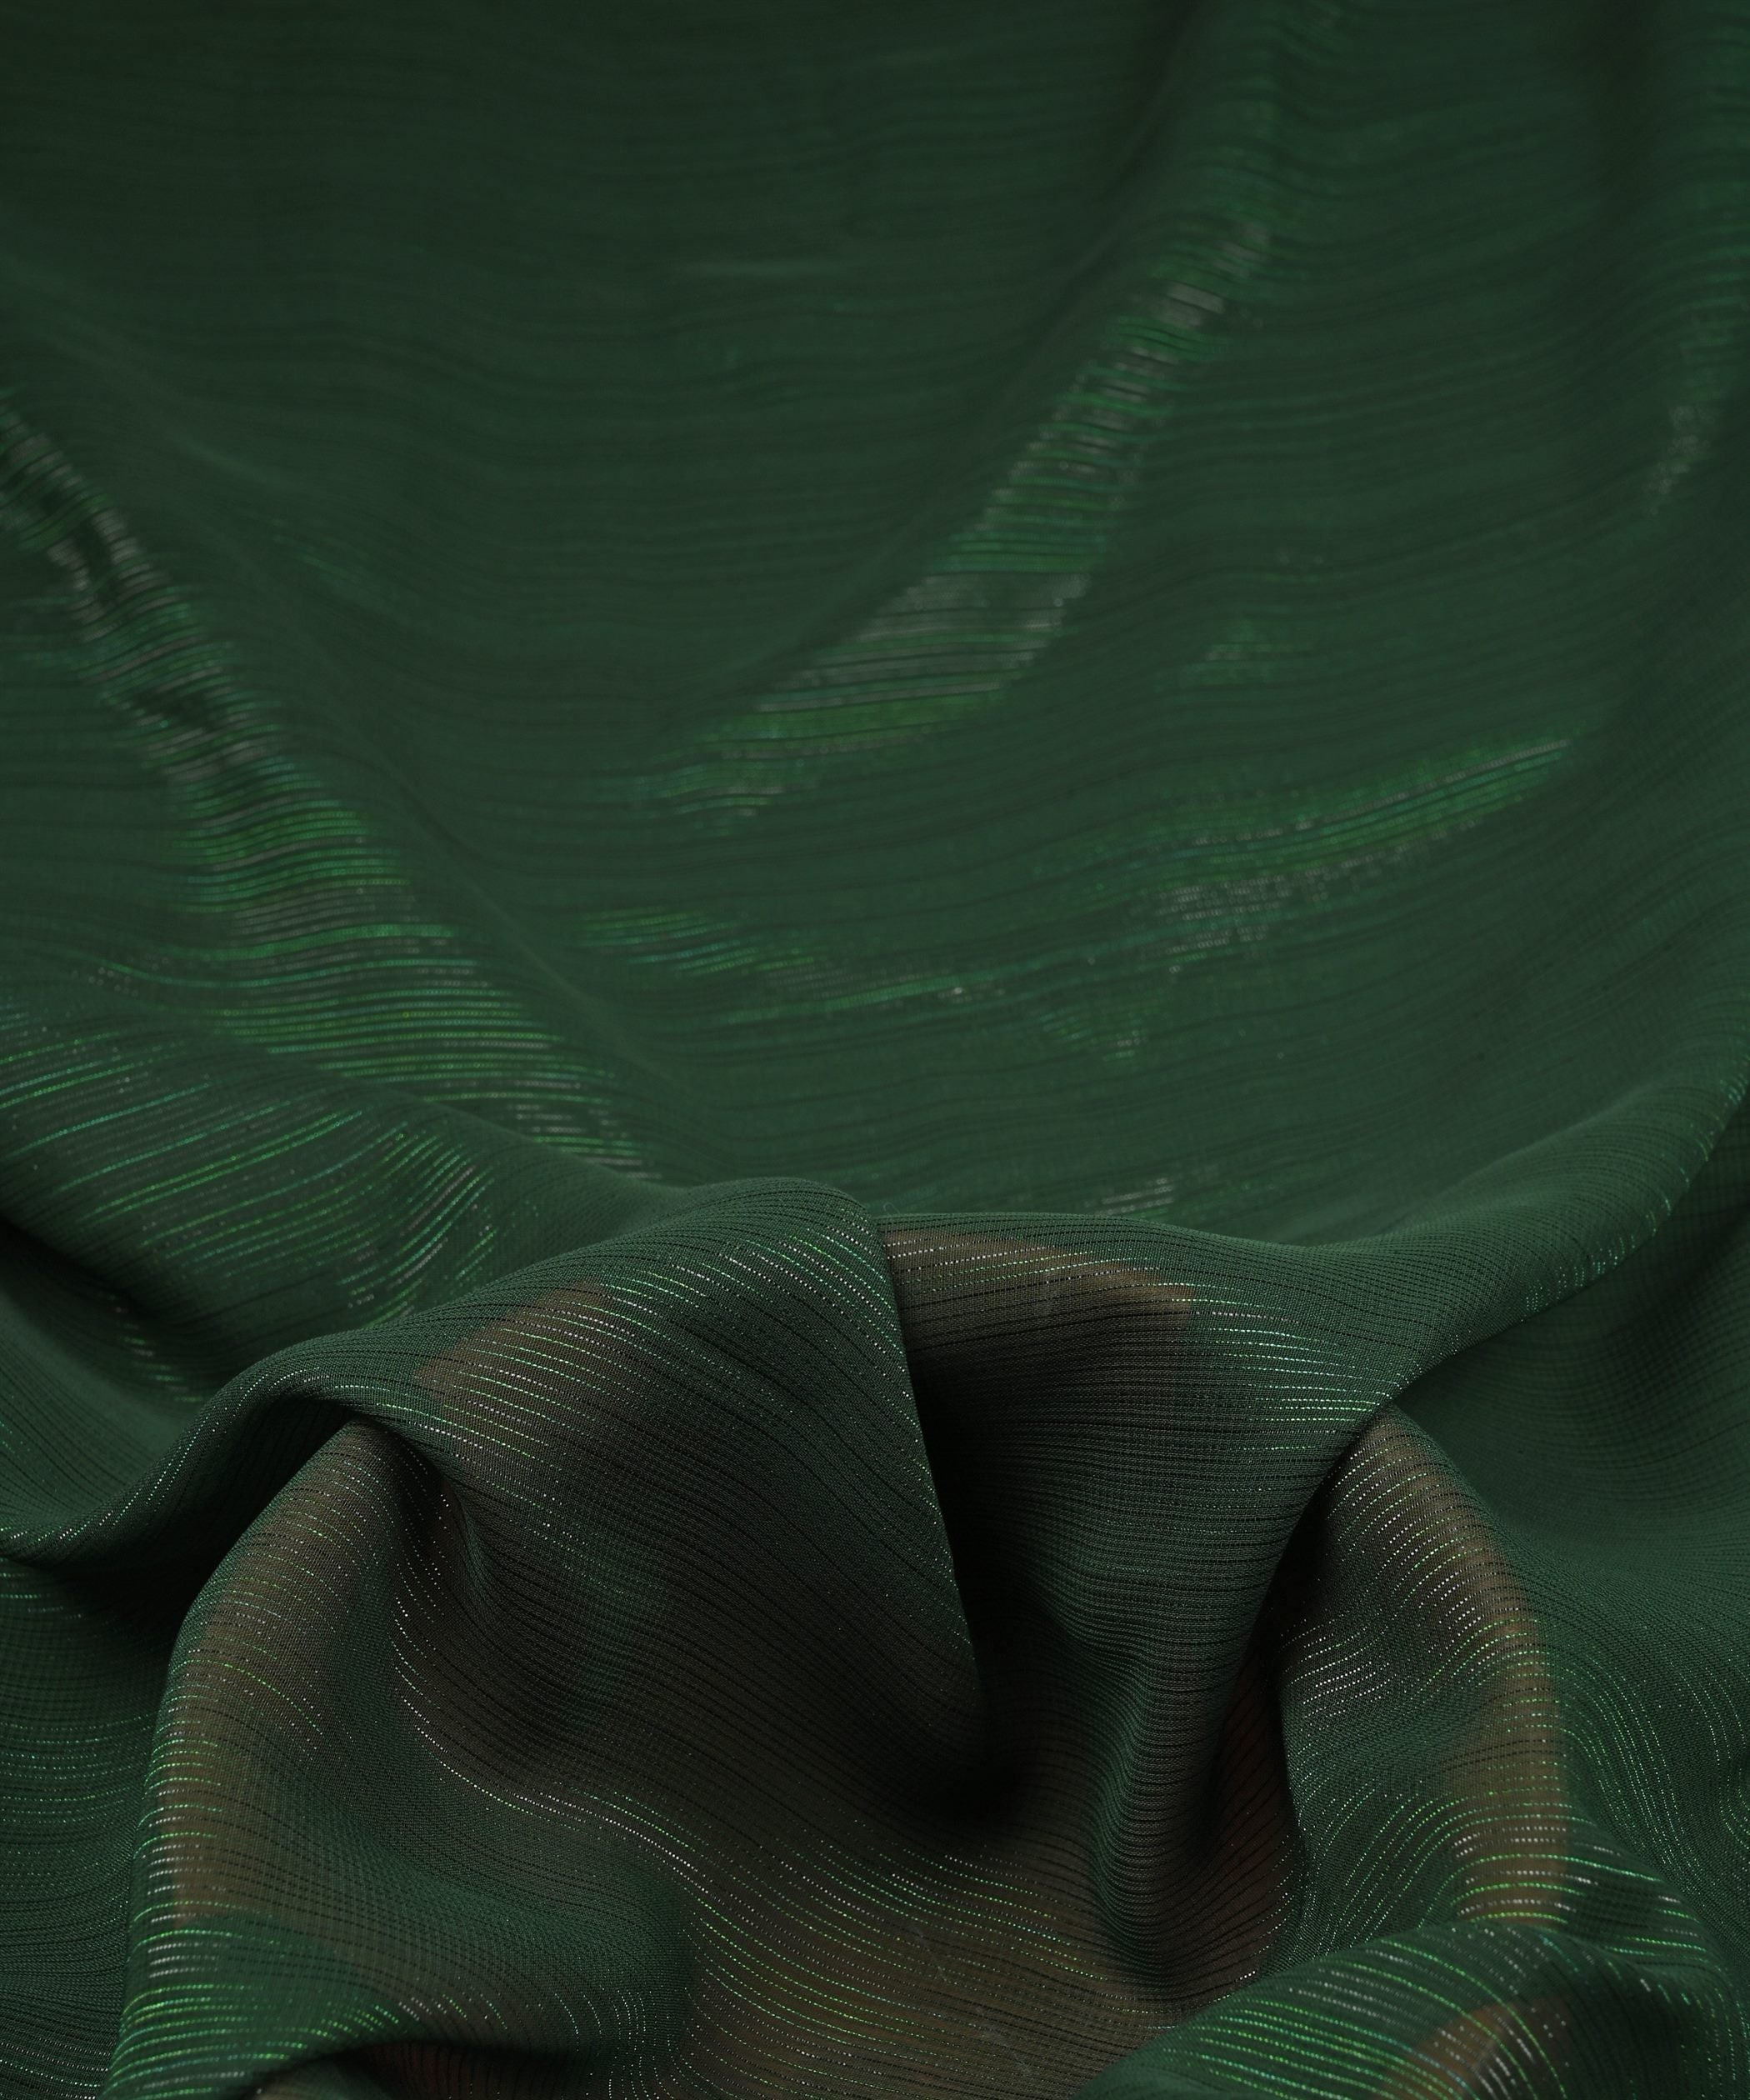 Dark Green Georgette Fabric with Stripes